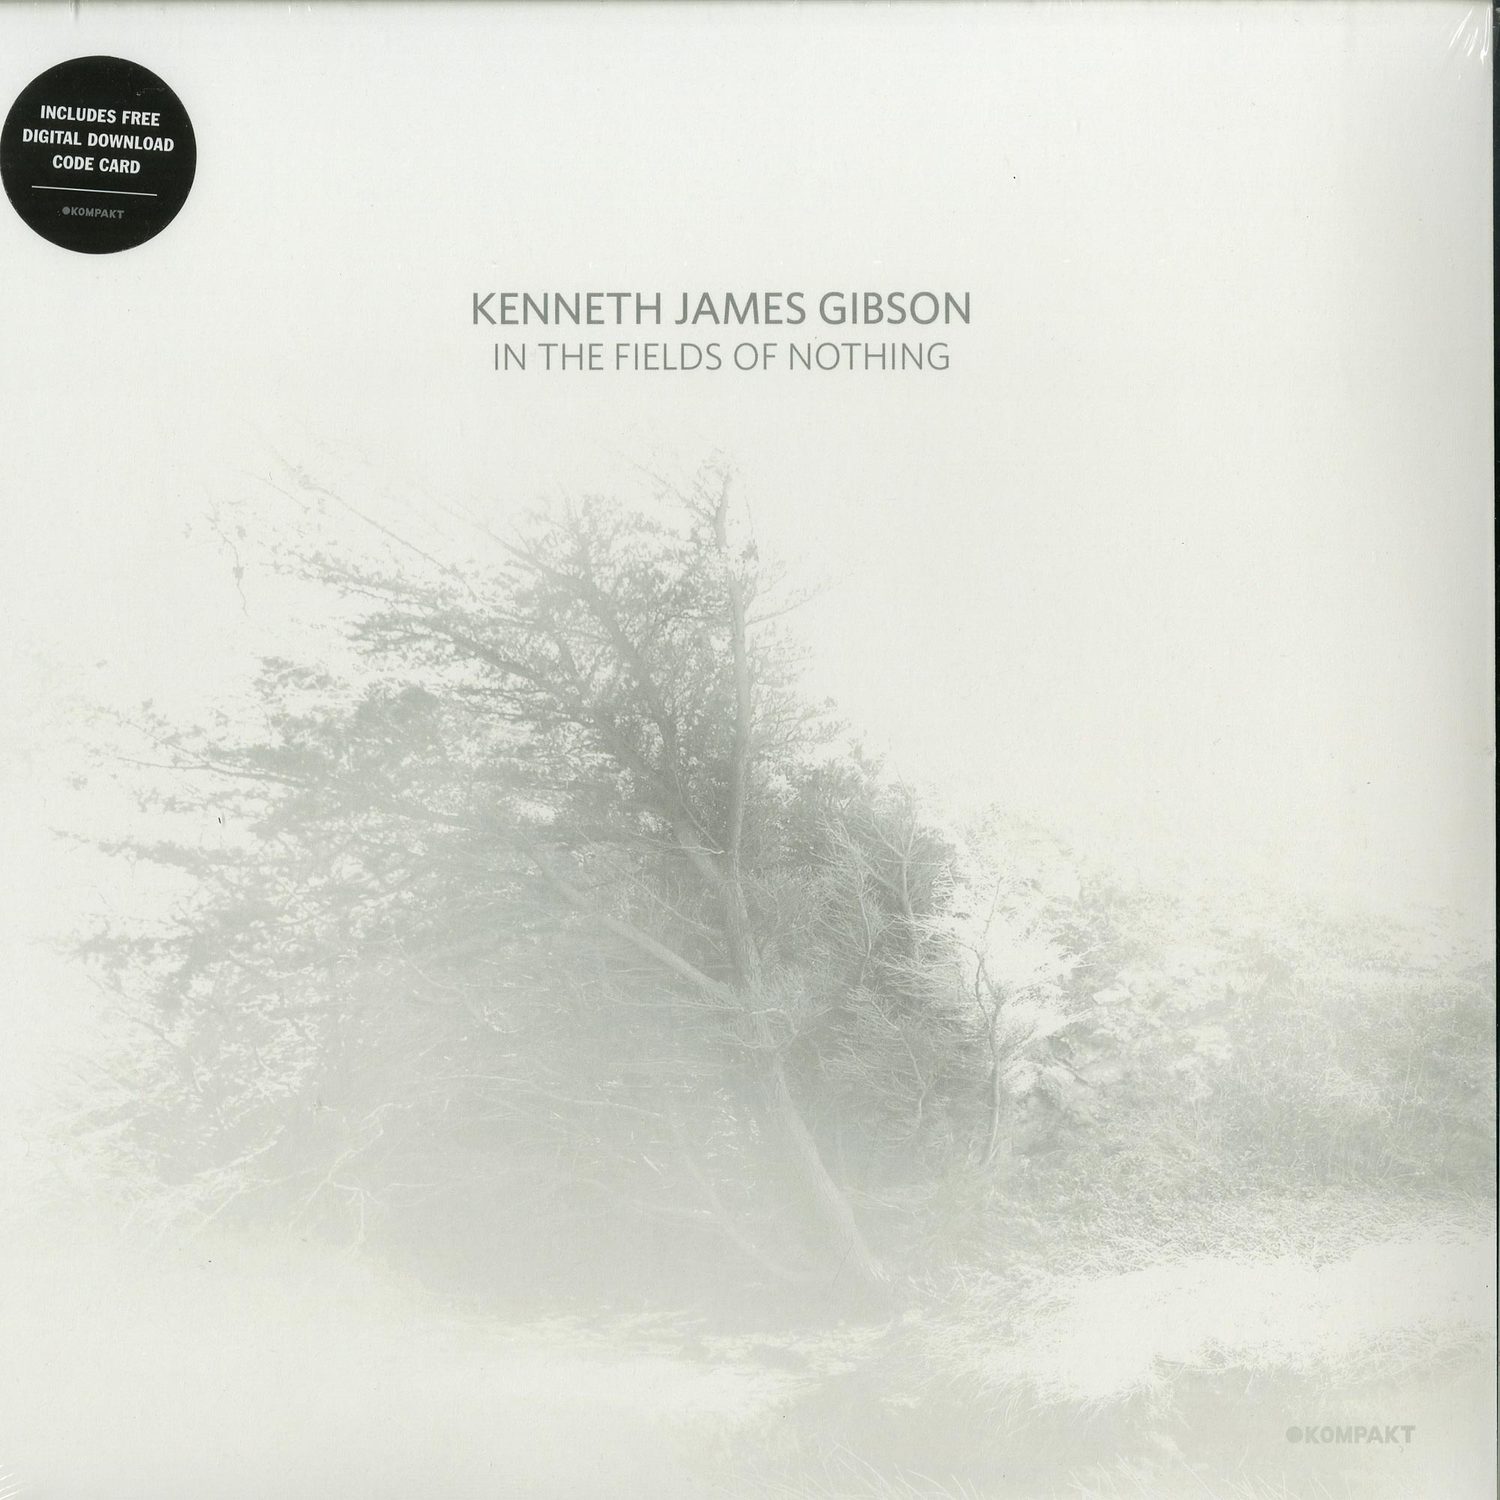 Kenneth James Gibson - IN THE FIELDS OF NOTHING 